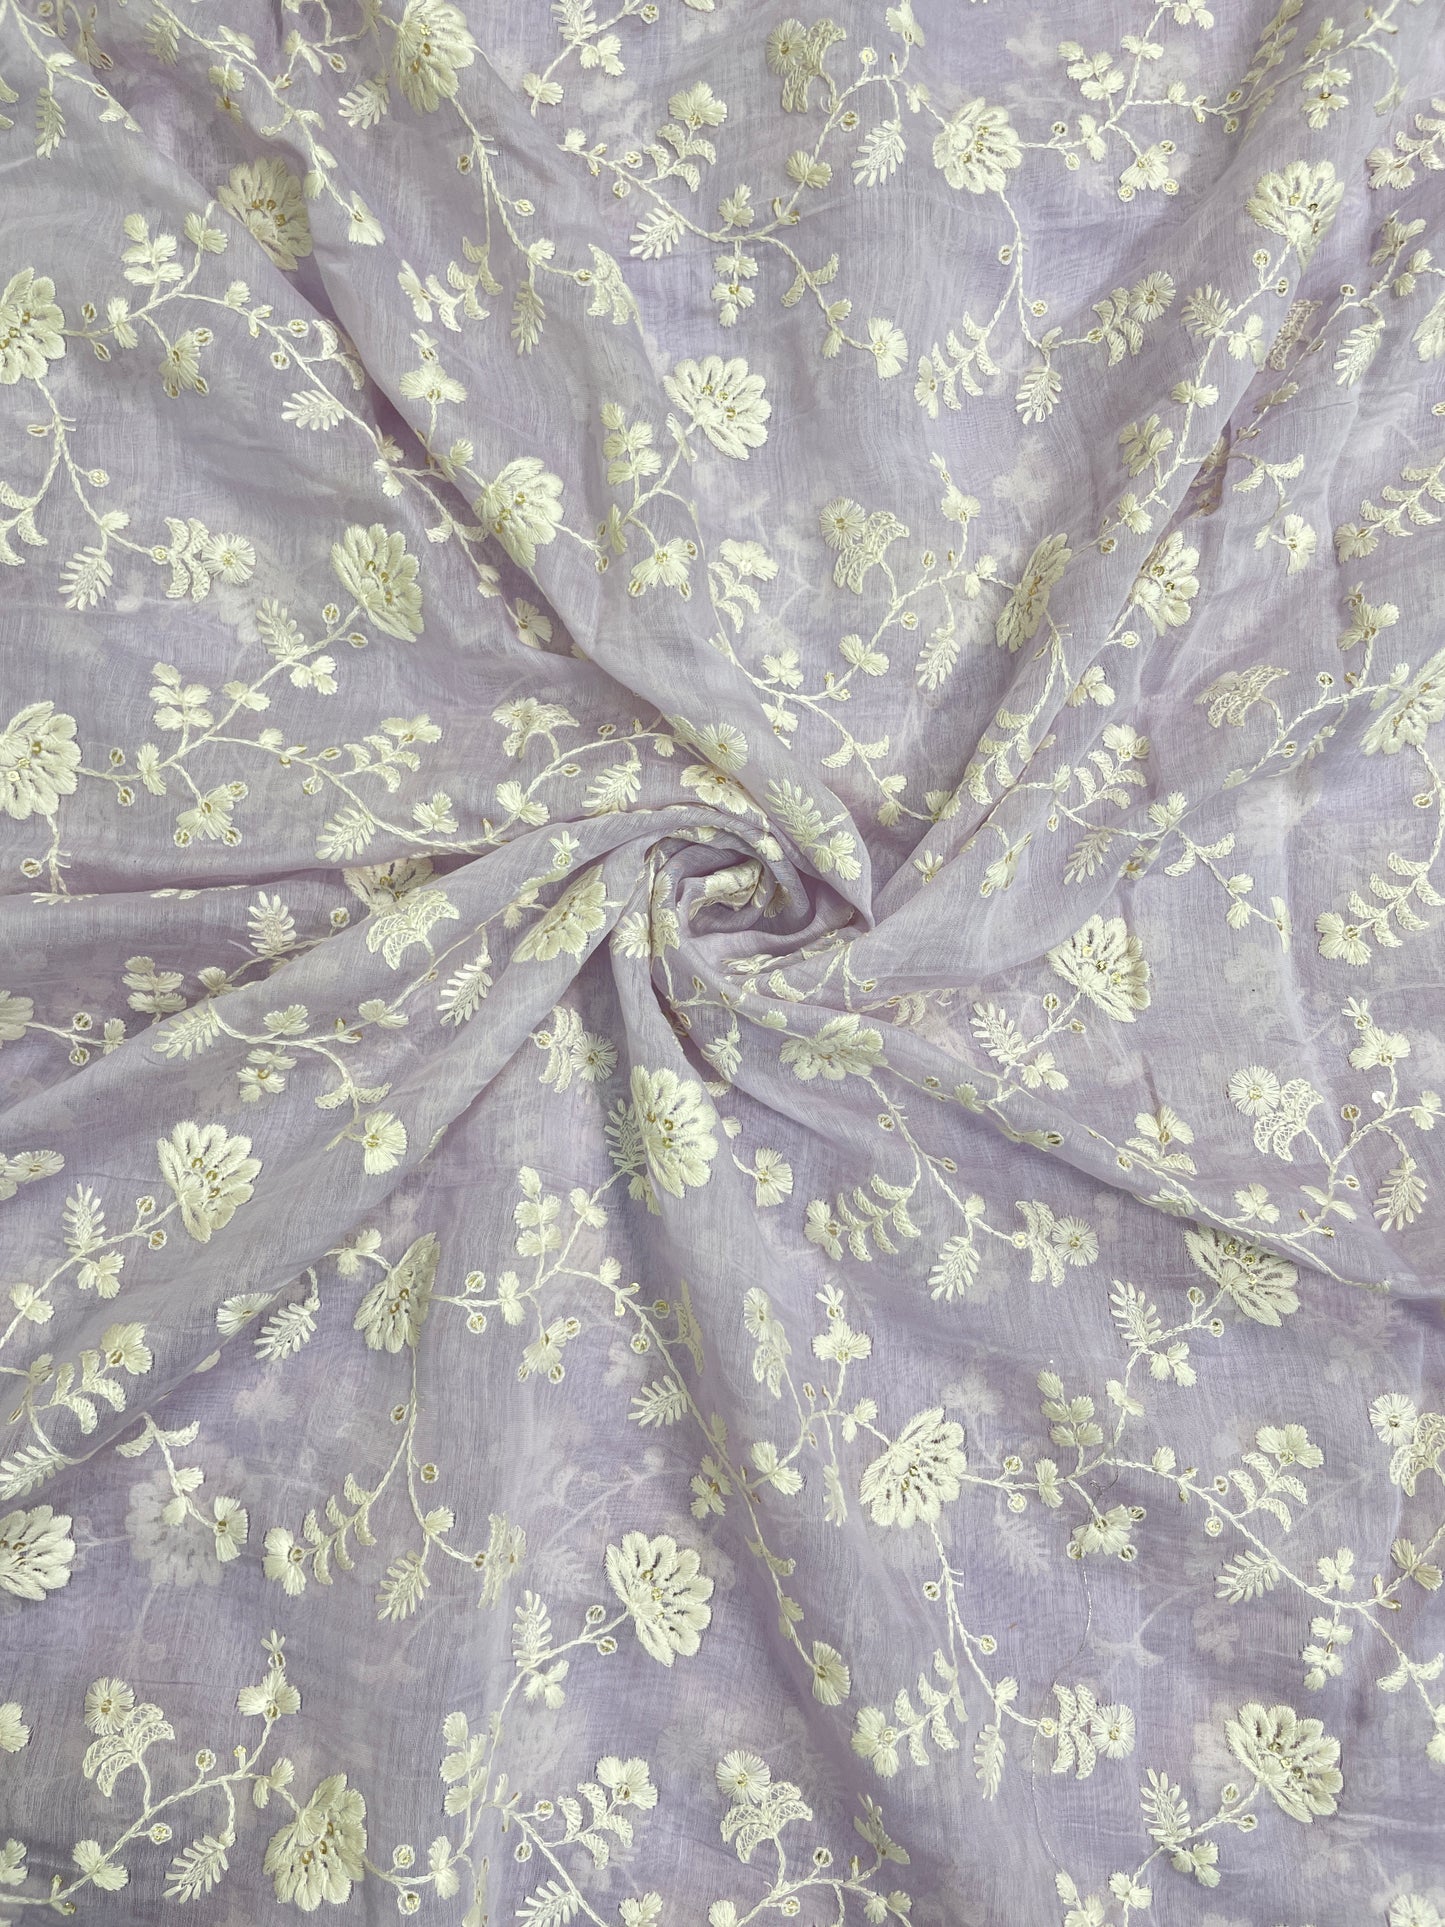 Gorgeous Appealing White Minimal Floral Thread Embroidery On Chanderi Fabric